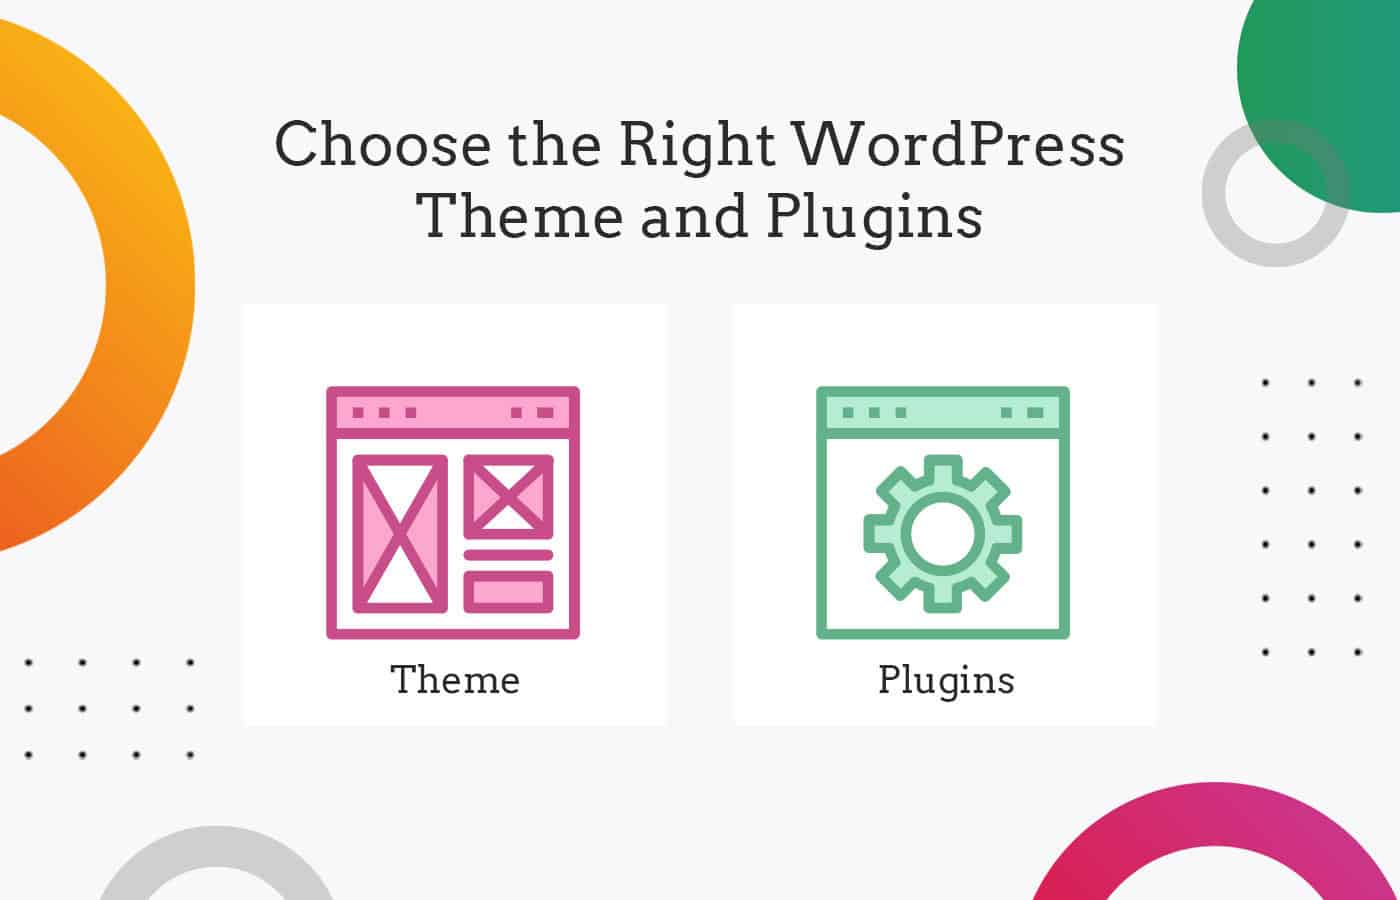 How to Choose the Right WordPress Theme and Plugins - Sanders Design